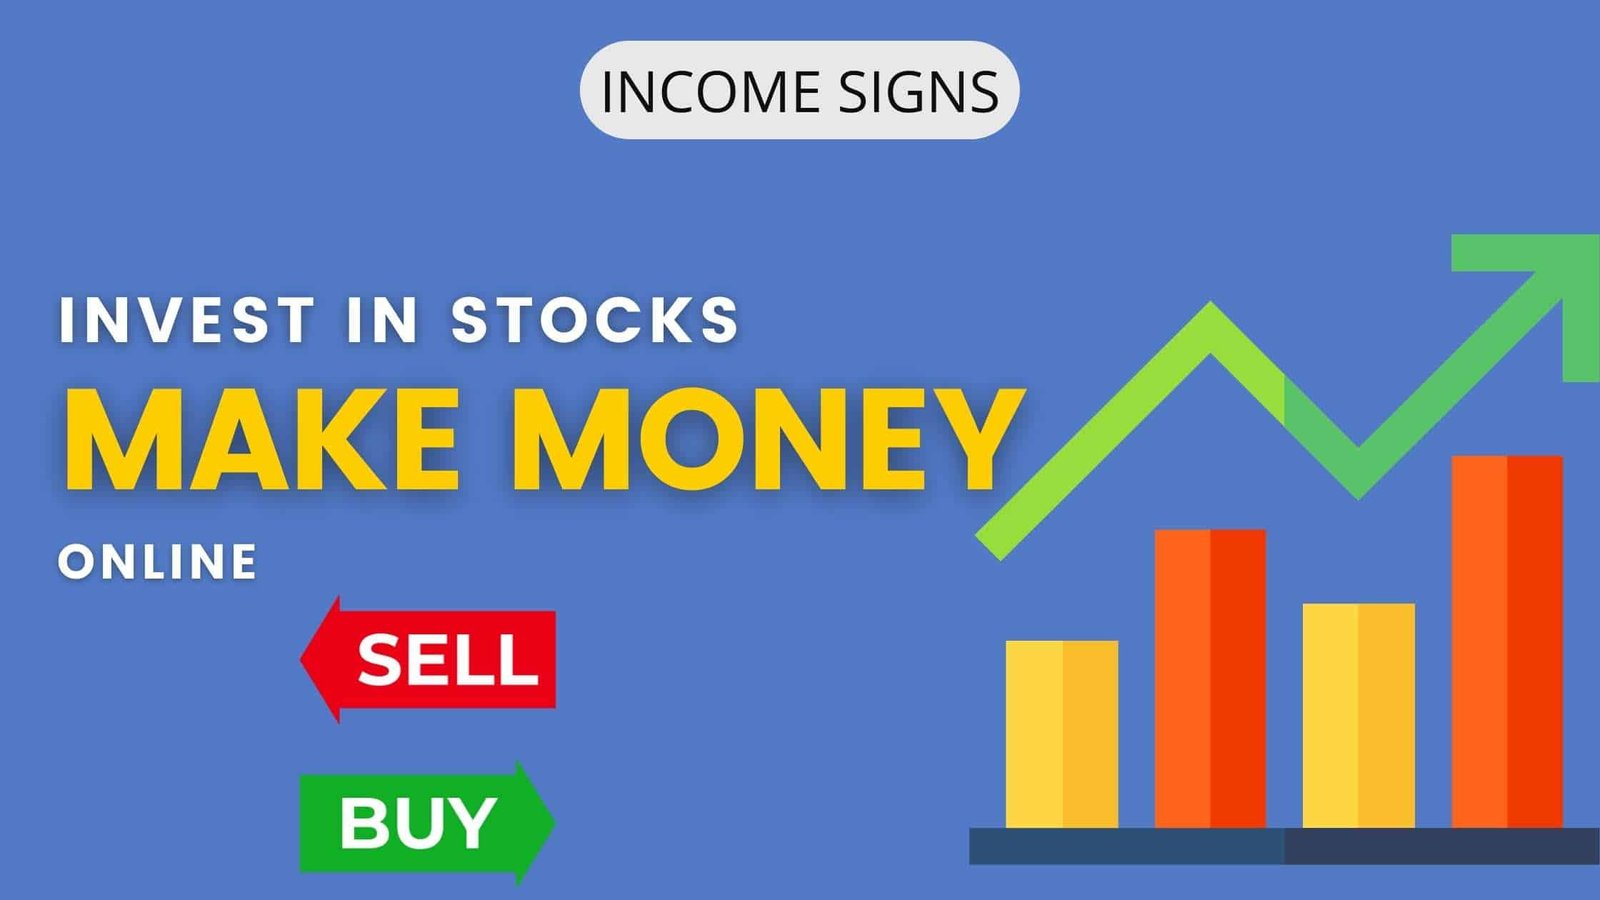 How to Invest in Stocks and Make Money